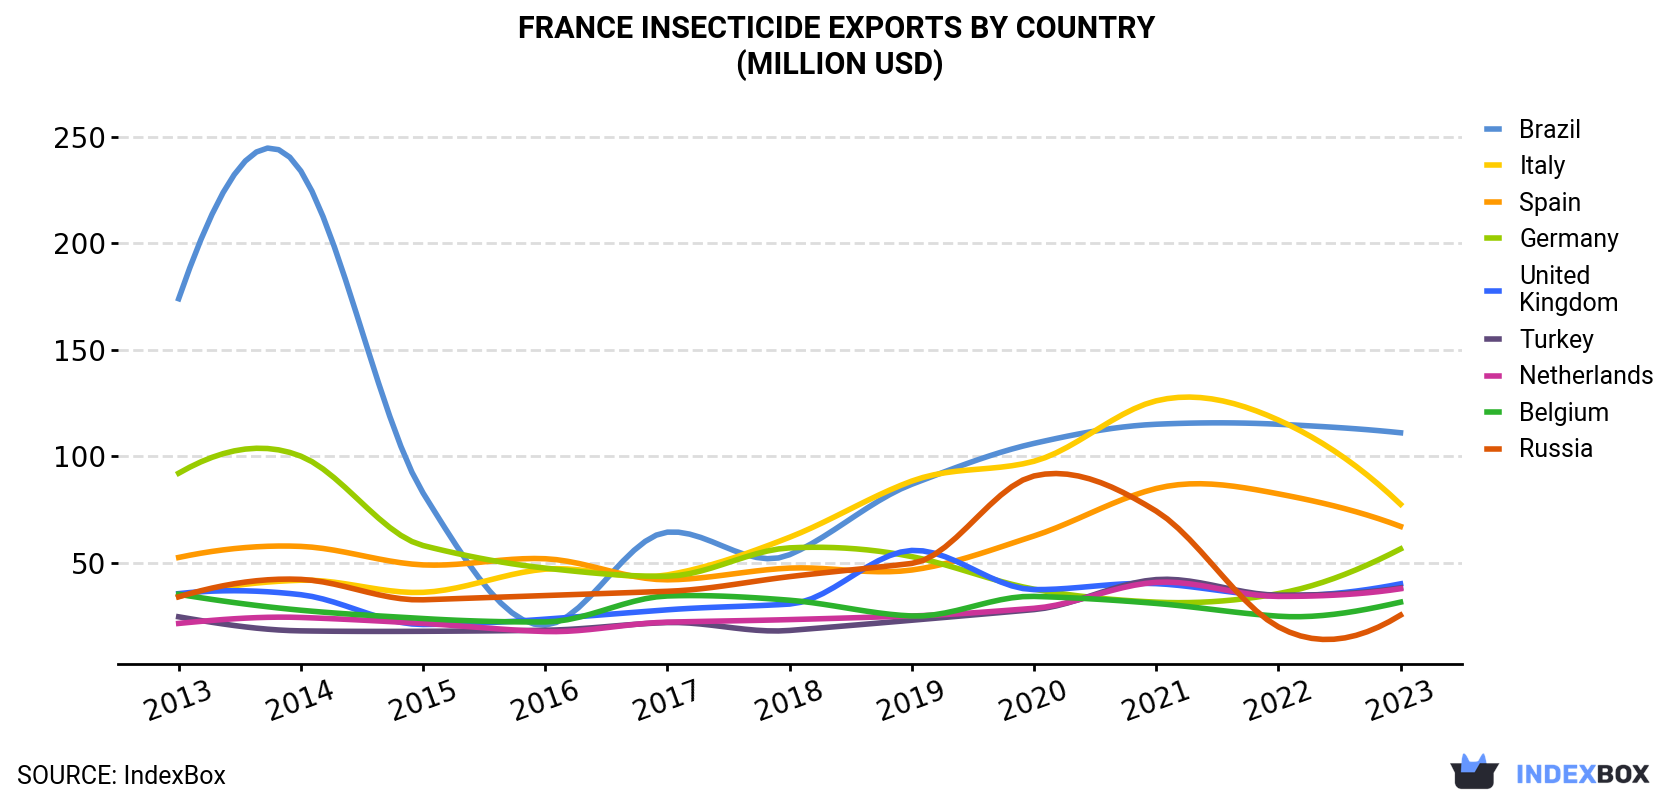 France Insecticide Exports By Country (Million USD)